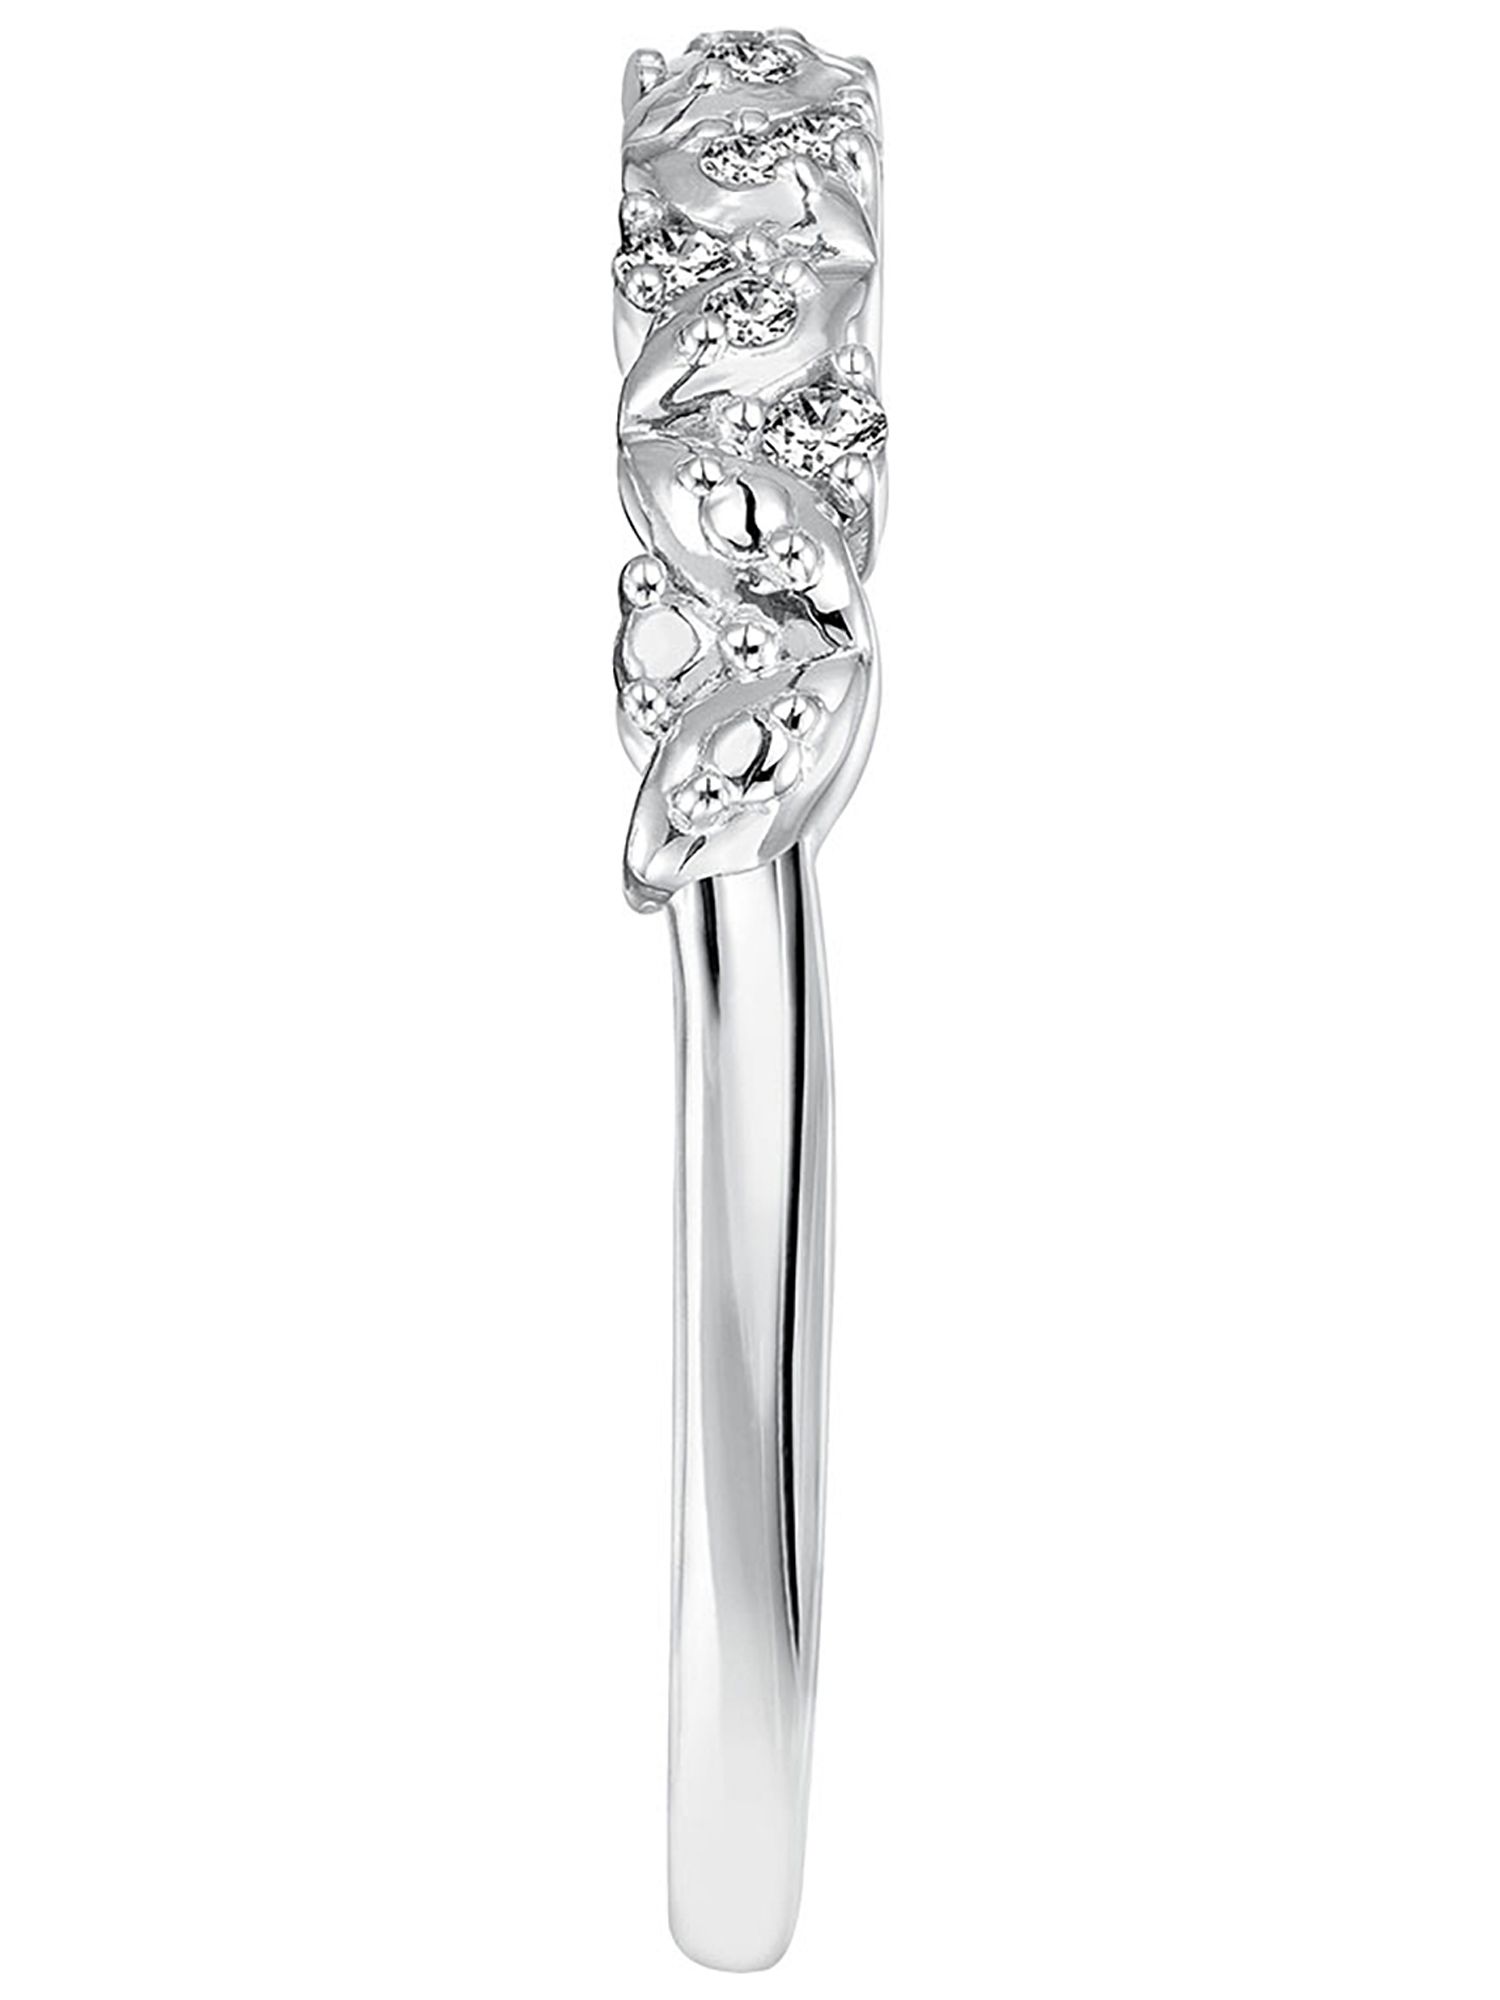 Sweet Remembrance 1/10 Carat T.W. Certified Diamond 10kt White Gold Women's Anniversary Band - image 4 of 7